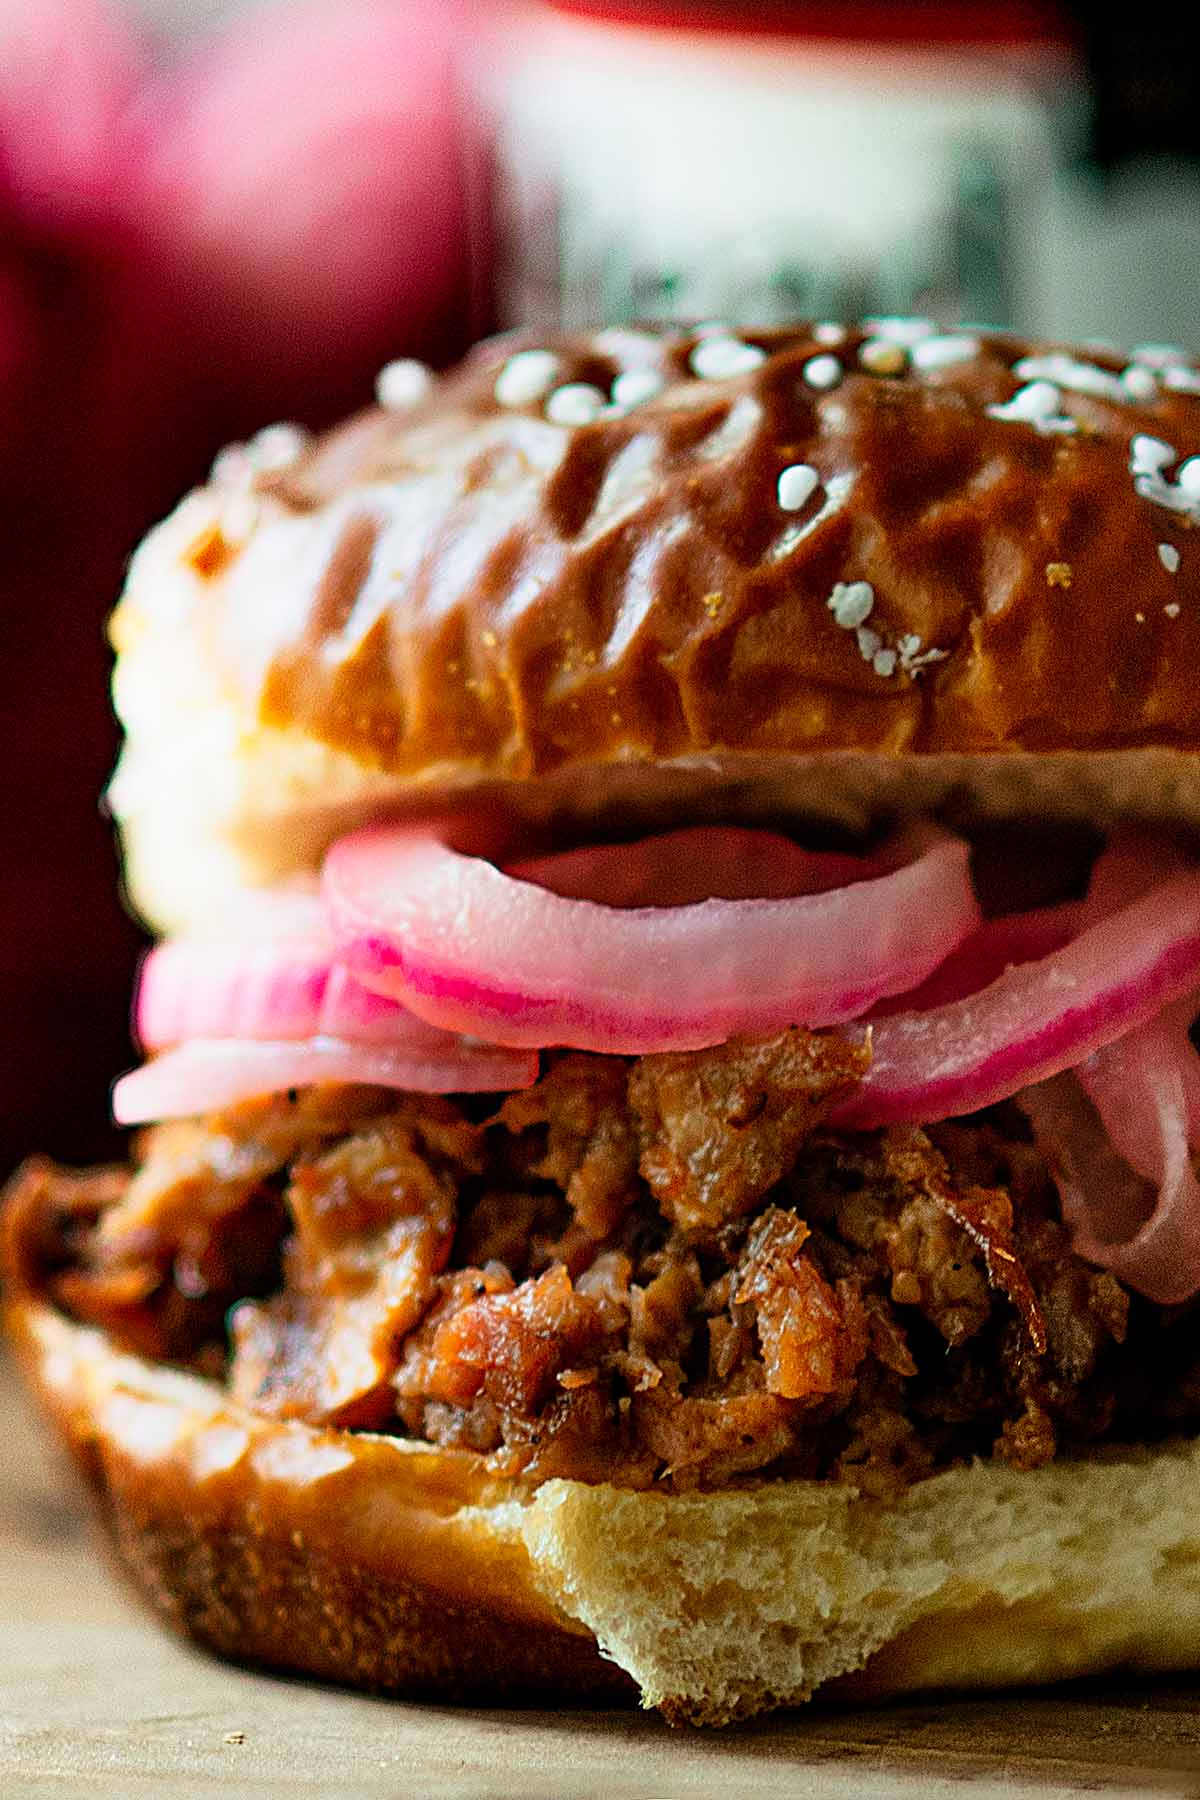 Pulled pork sandwich served with pickled onions and a salted pretzel bun.